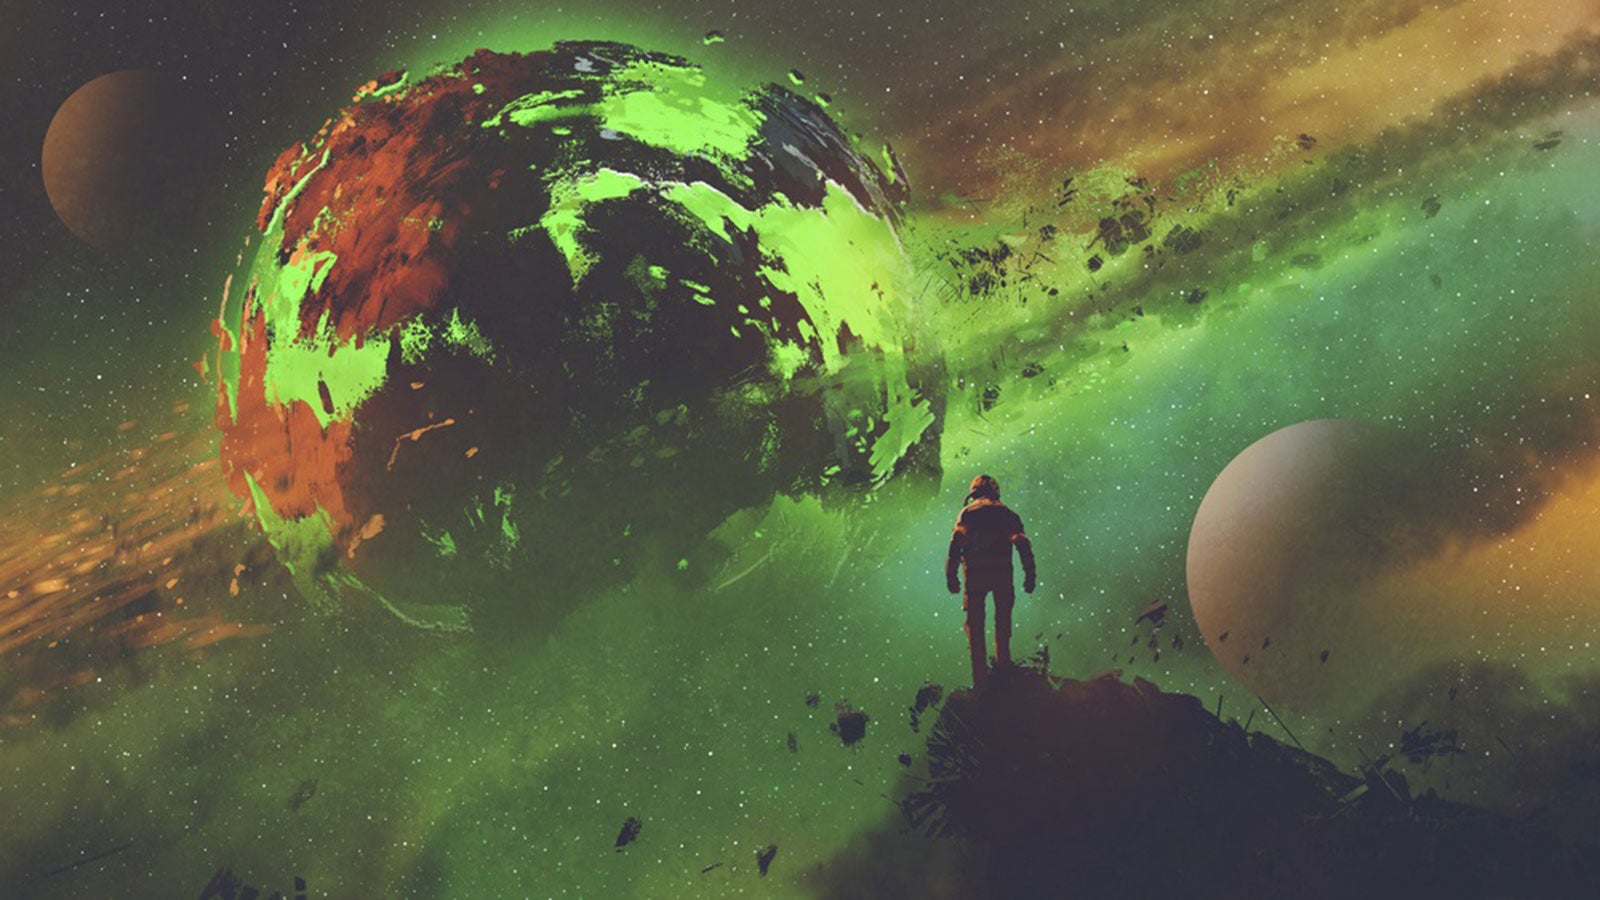 Illustration of an astronaut stood on a rock looking out at a large green glowing planet